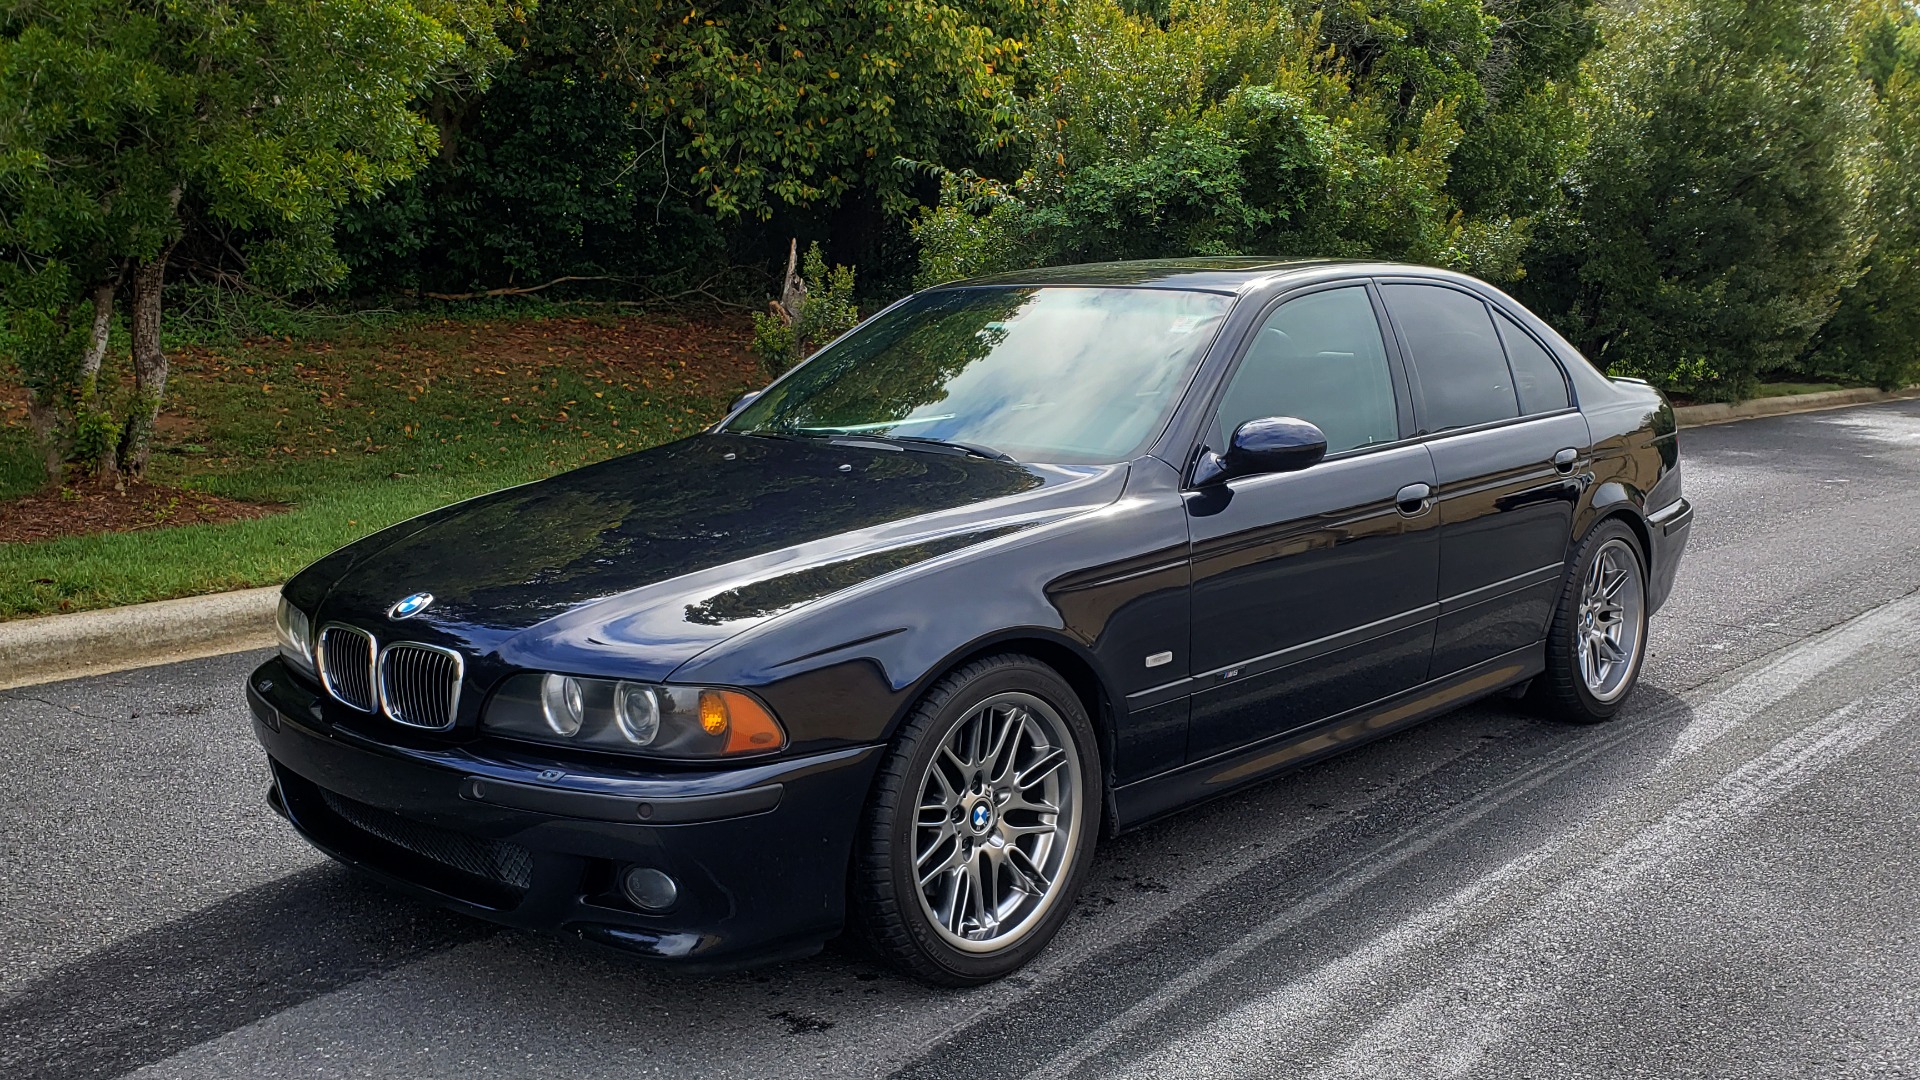 Used 2003 BMW 5 SERIES M5 / 6-SPD MAN / NAV / PARK DIST CNTRL / PREM SND / SUNROOF for sale Sold at Formula Imports in Charlotte NC 28227 3